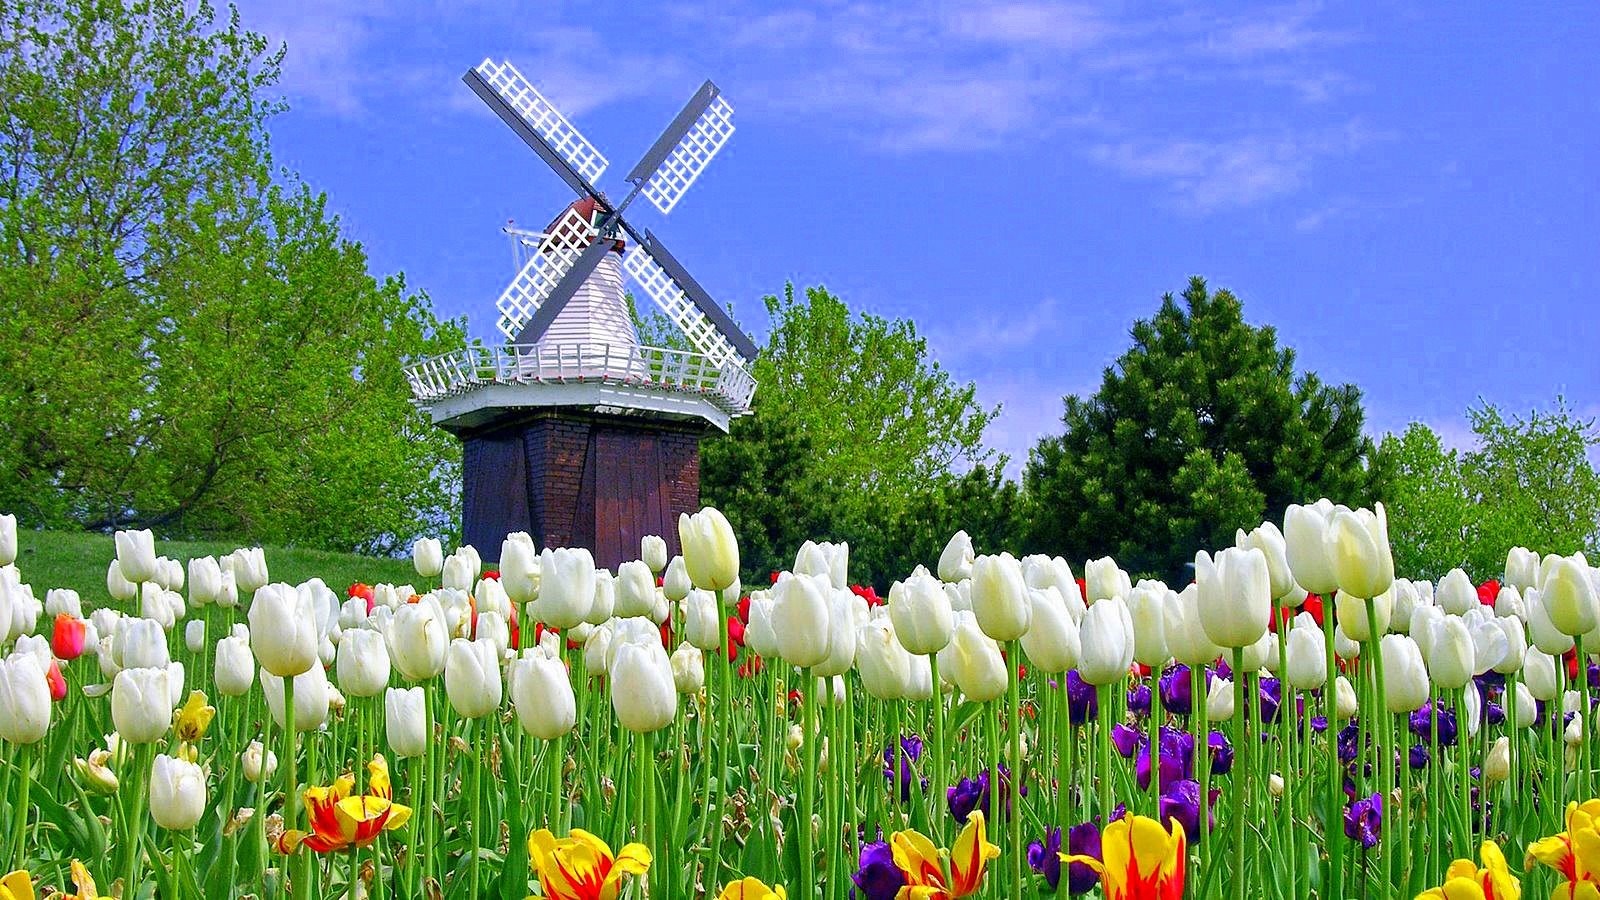 flower tulip time fresh colorful windmill grass harmony delight calmness flowers refreshing holand blue sky colors tulips europe nice summer nature wallpaper hd for mobile